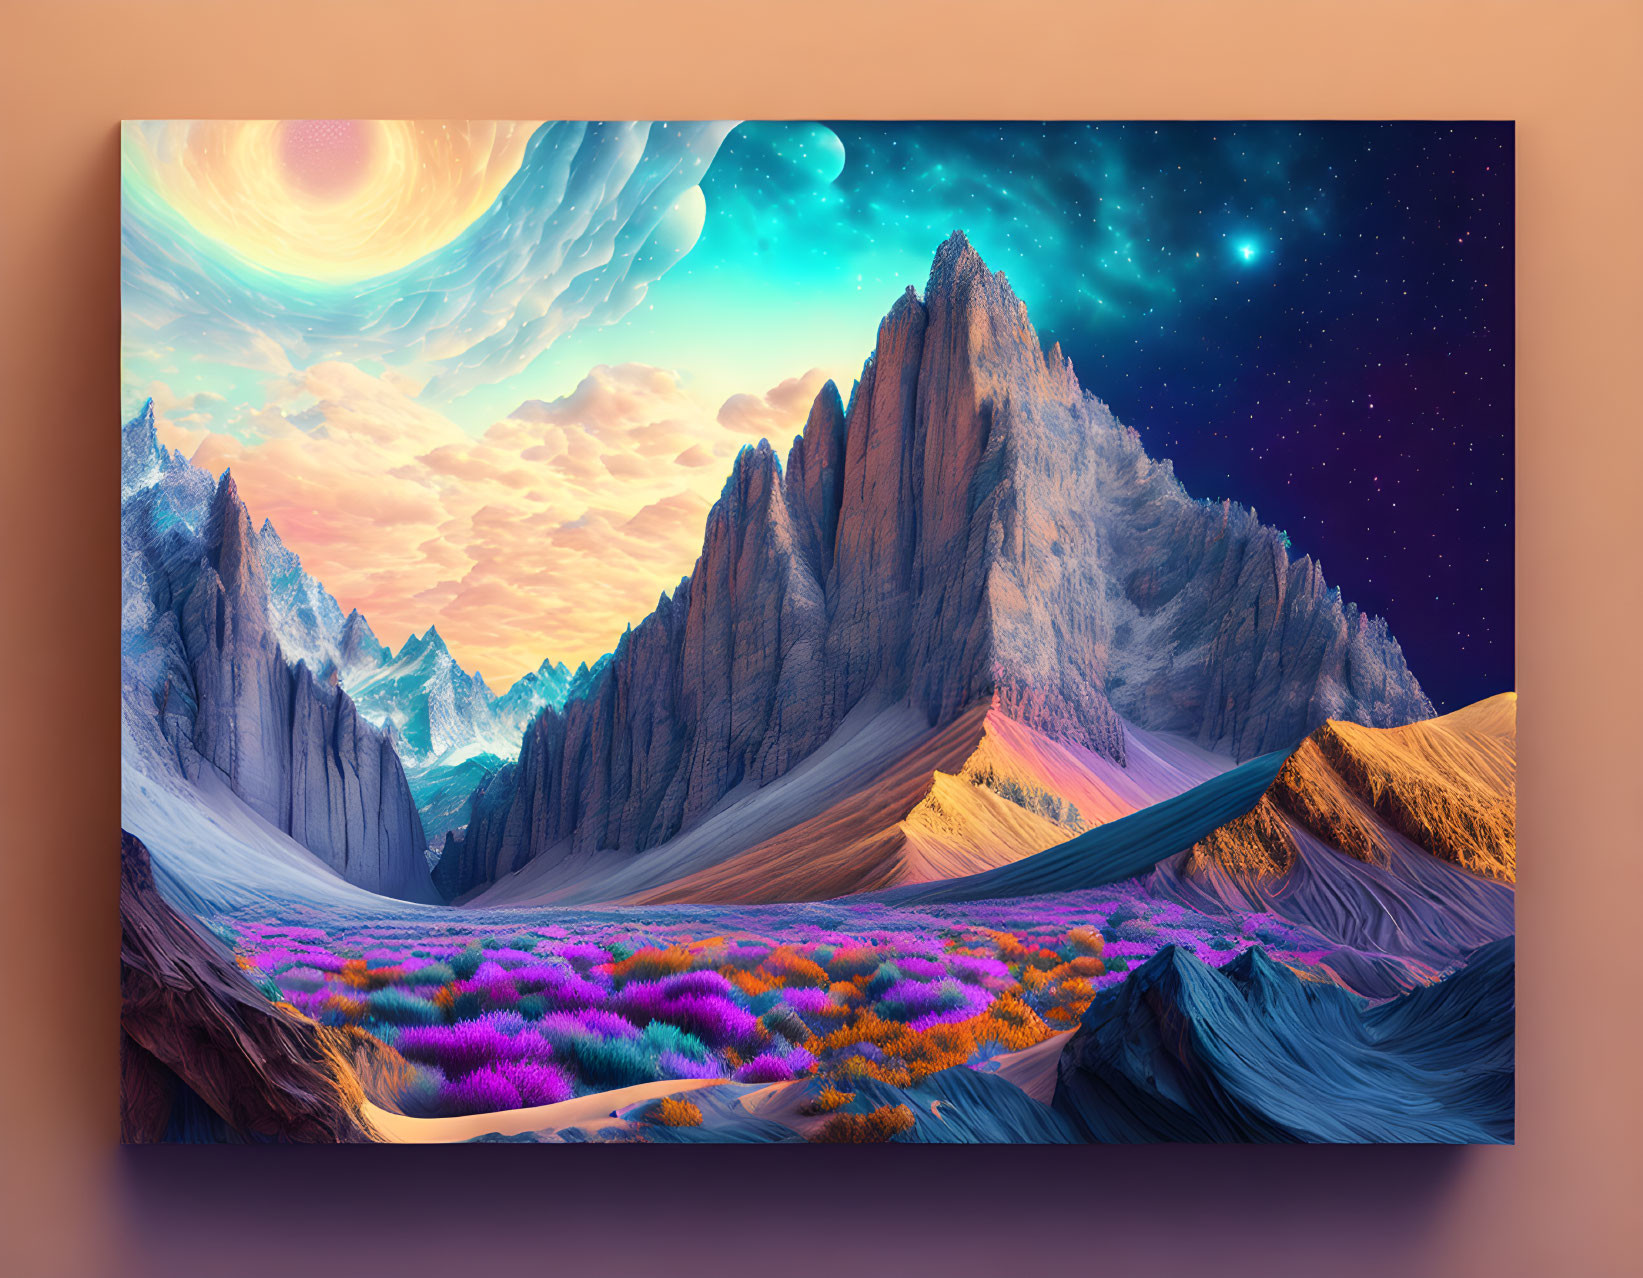 Vibrant purple flora in surreal landscape with rocky peaks at dusk.